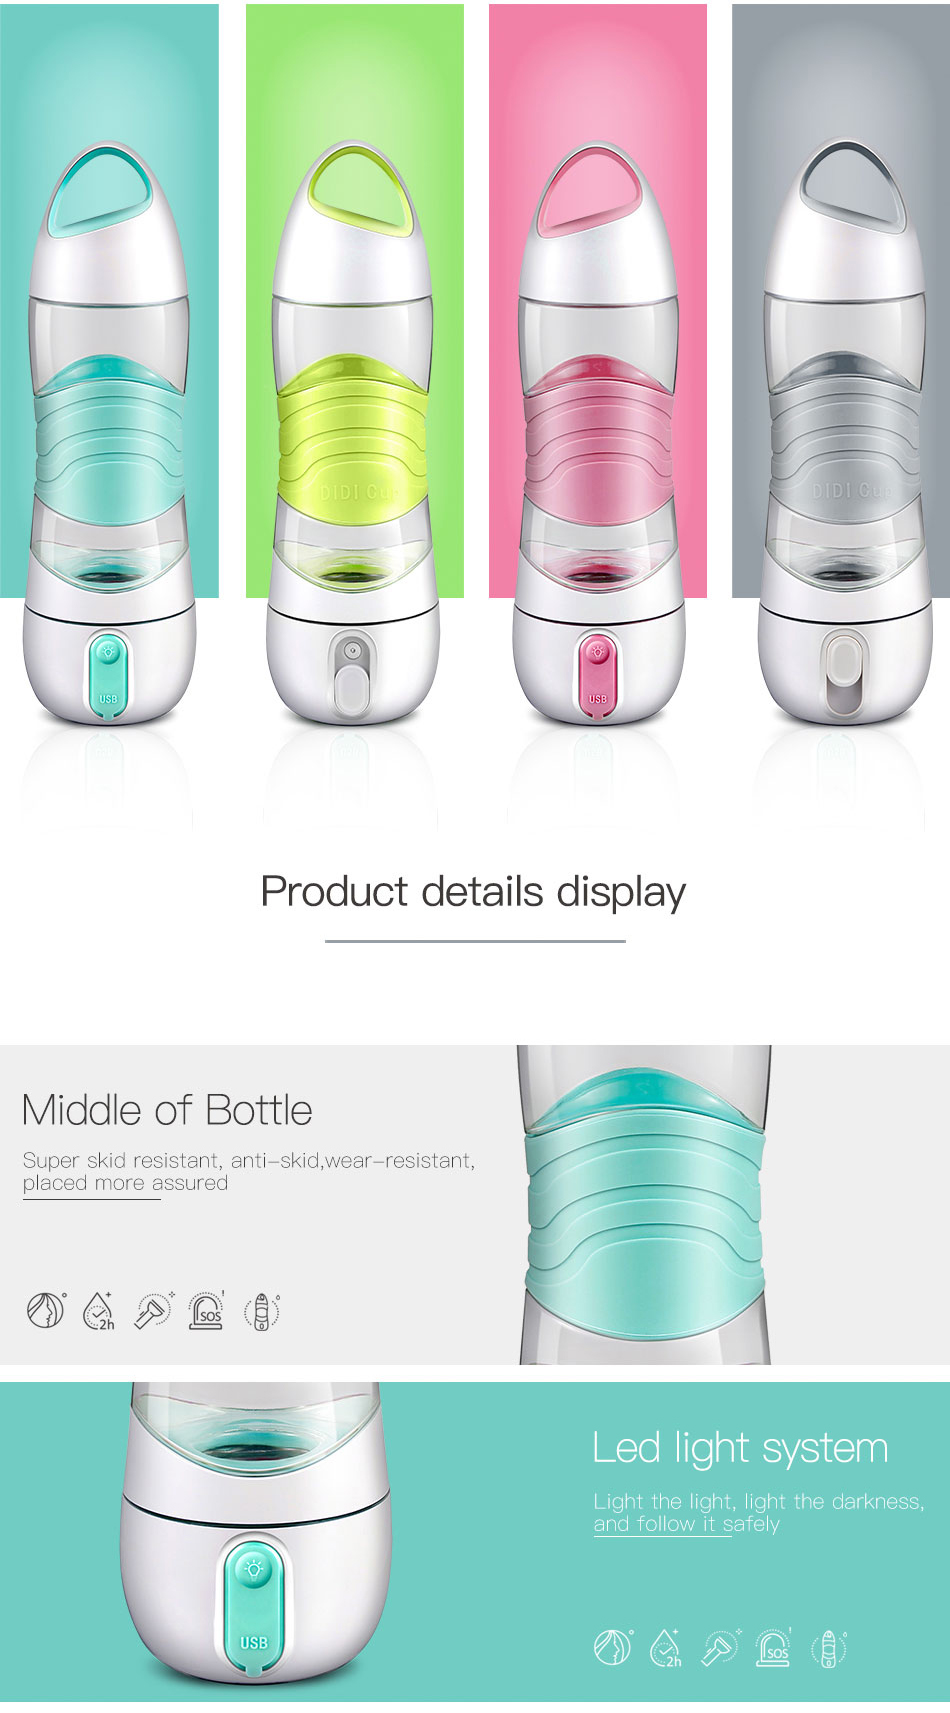 KCASA-DDH8 Portable USB Air Humidifier Spray 400ML Water Bottles Creative Outdoor Drinking Cup Sports Spray Bottle with Light 18